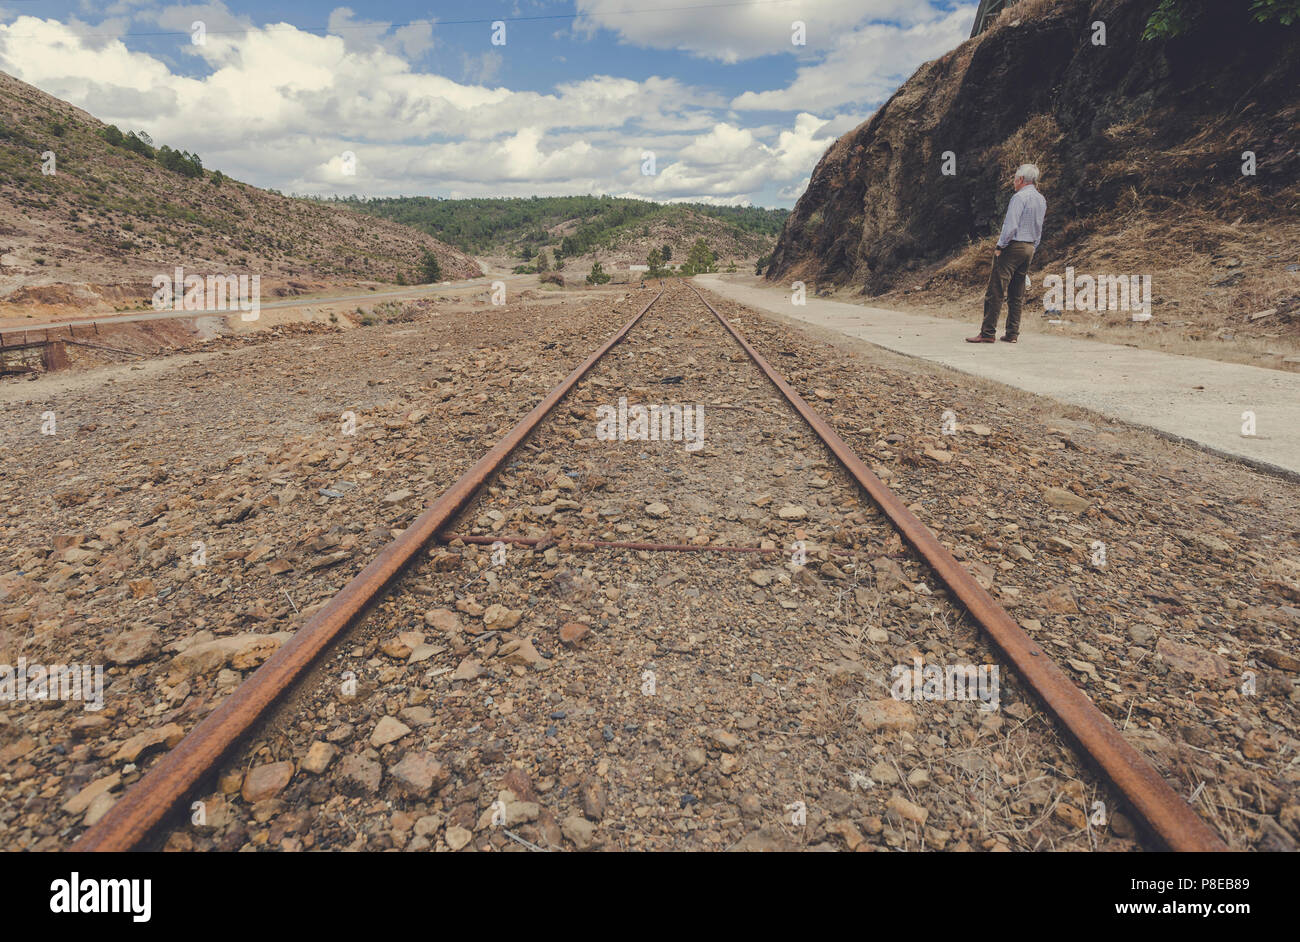 Elderly man standing and facing away from the tracks of the train getting lost on the horizon in the Zaranda mines between the towns of Nerva and Riot Stock Photo